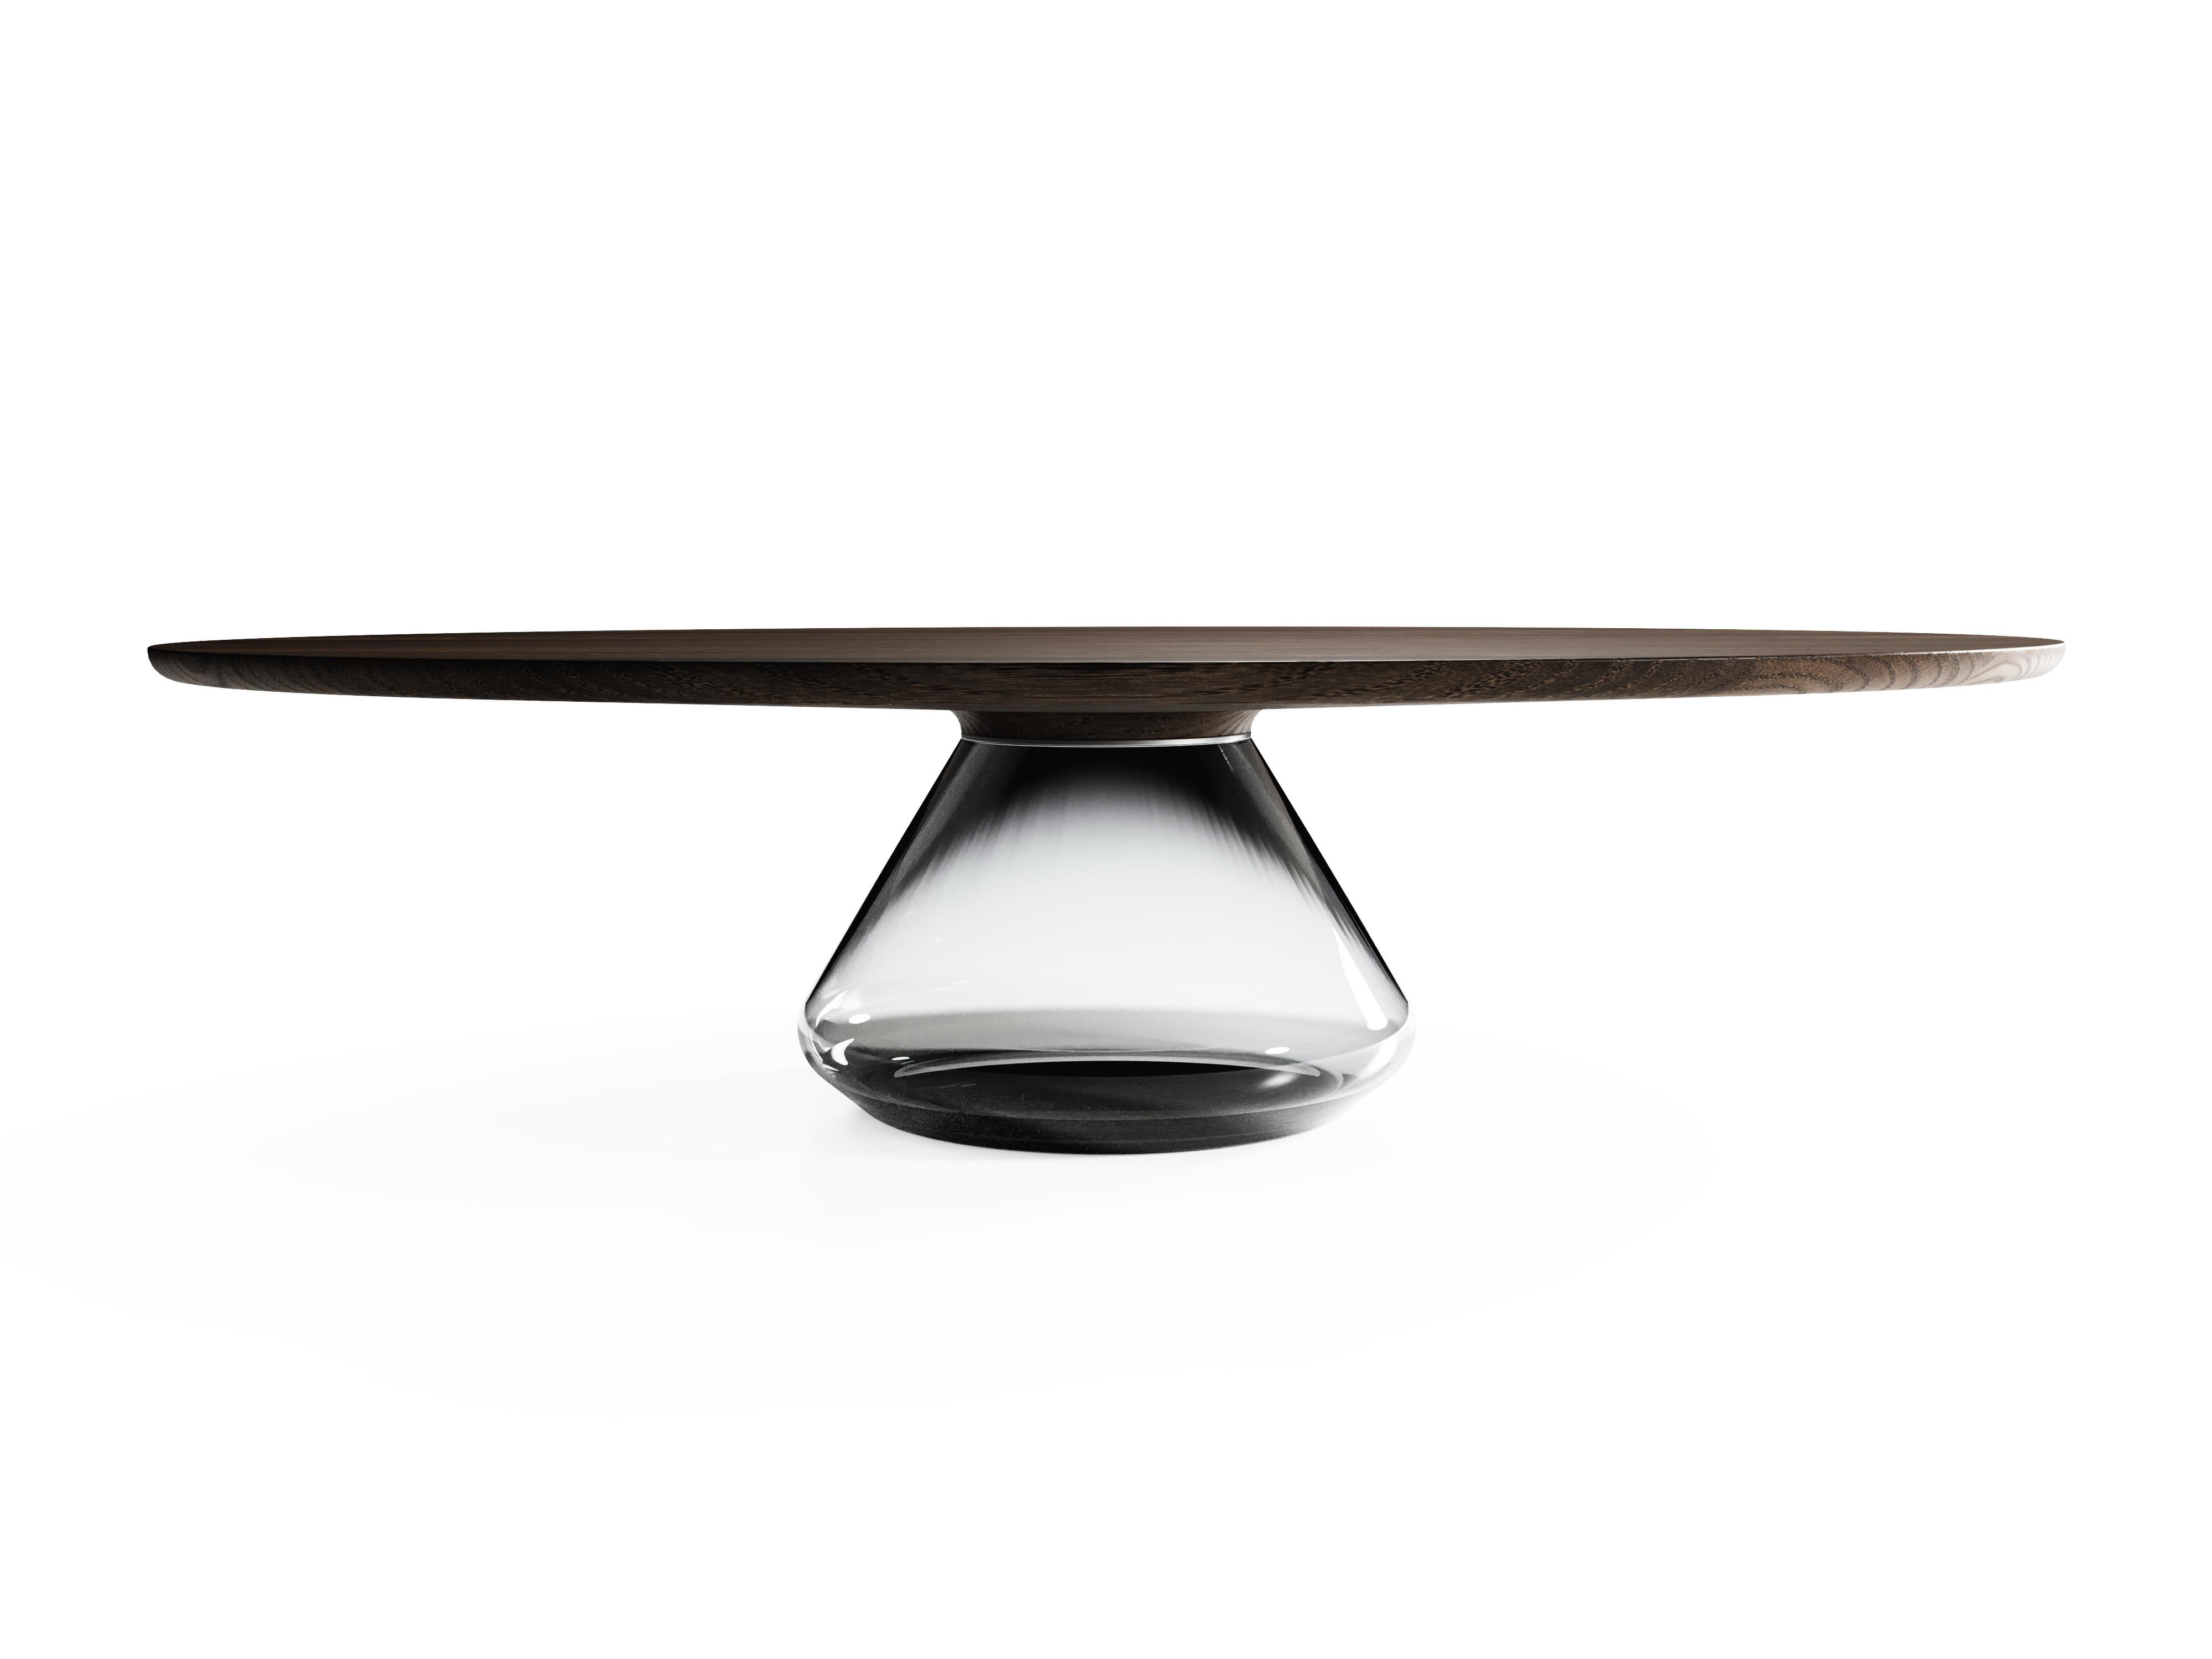 The Smoky Eclipse I, limited edition coffee table by Grzegorz Majka
Limited edition of 8
Dimensions: 54 x 48 x 14 in
Materials: glass, oak

The total eclipse of every interior? With this amazing table everything is possible as with its